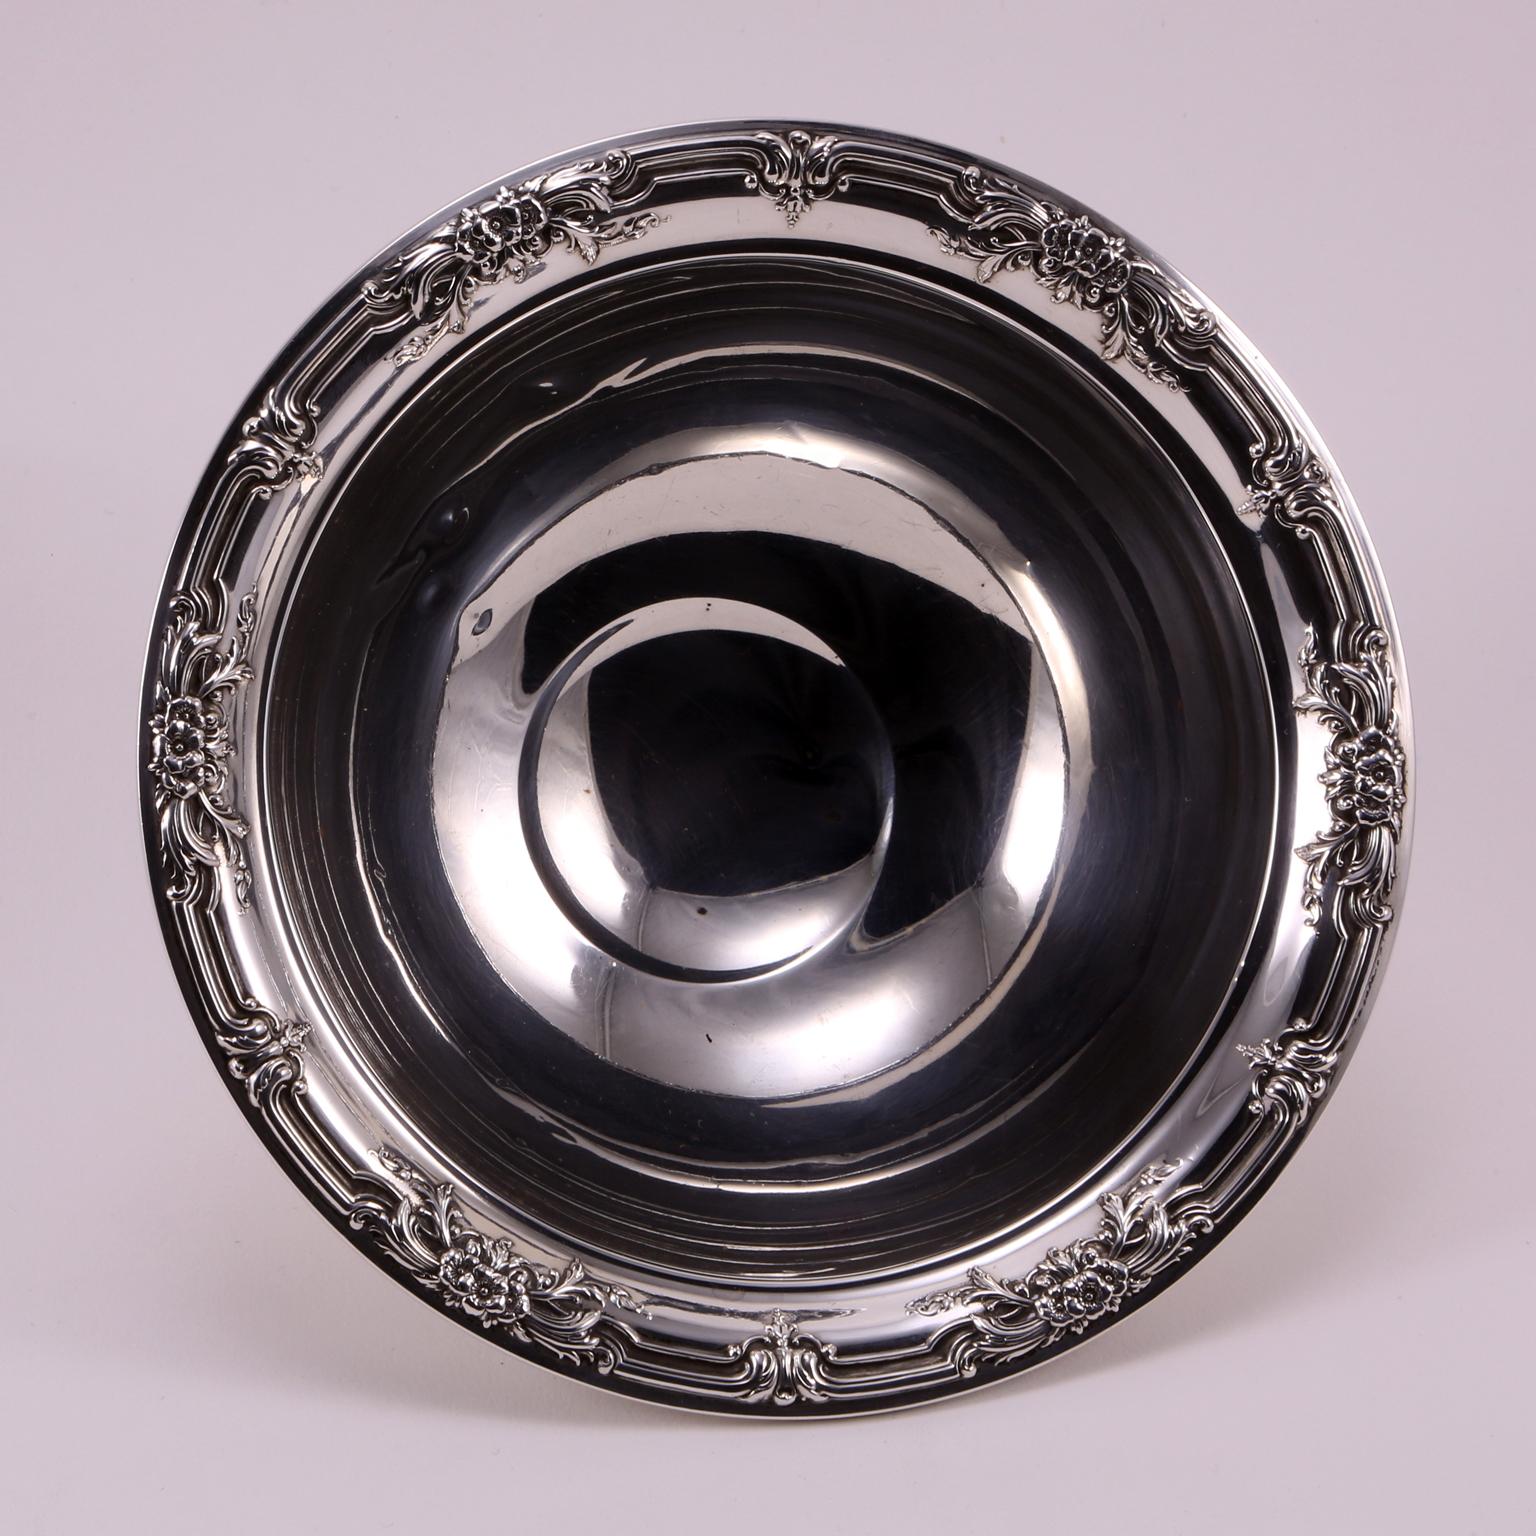 19th Century Silver Bowl Decorated with Flowers and Branches (Art nouveau) im Angebot